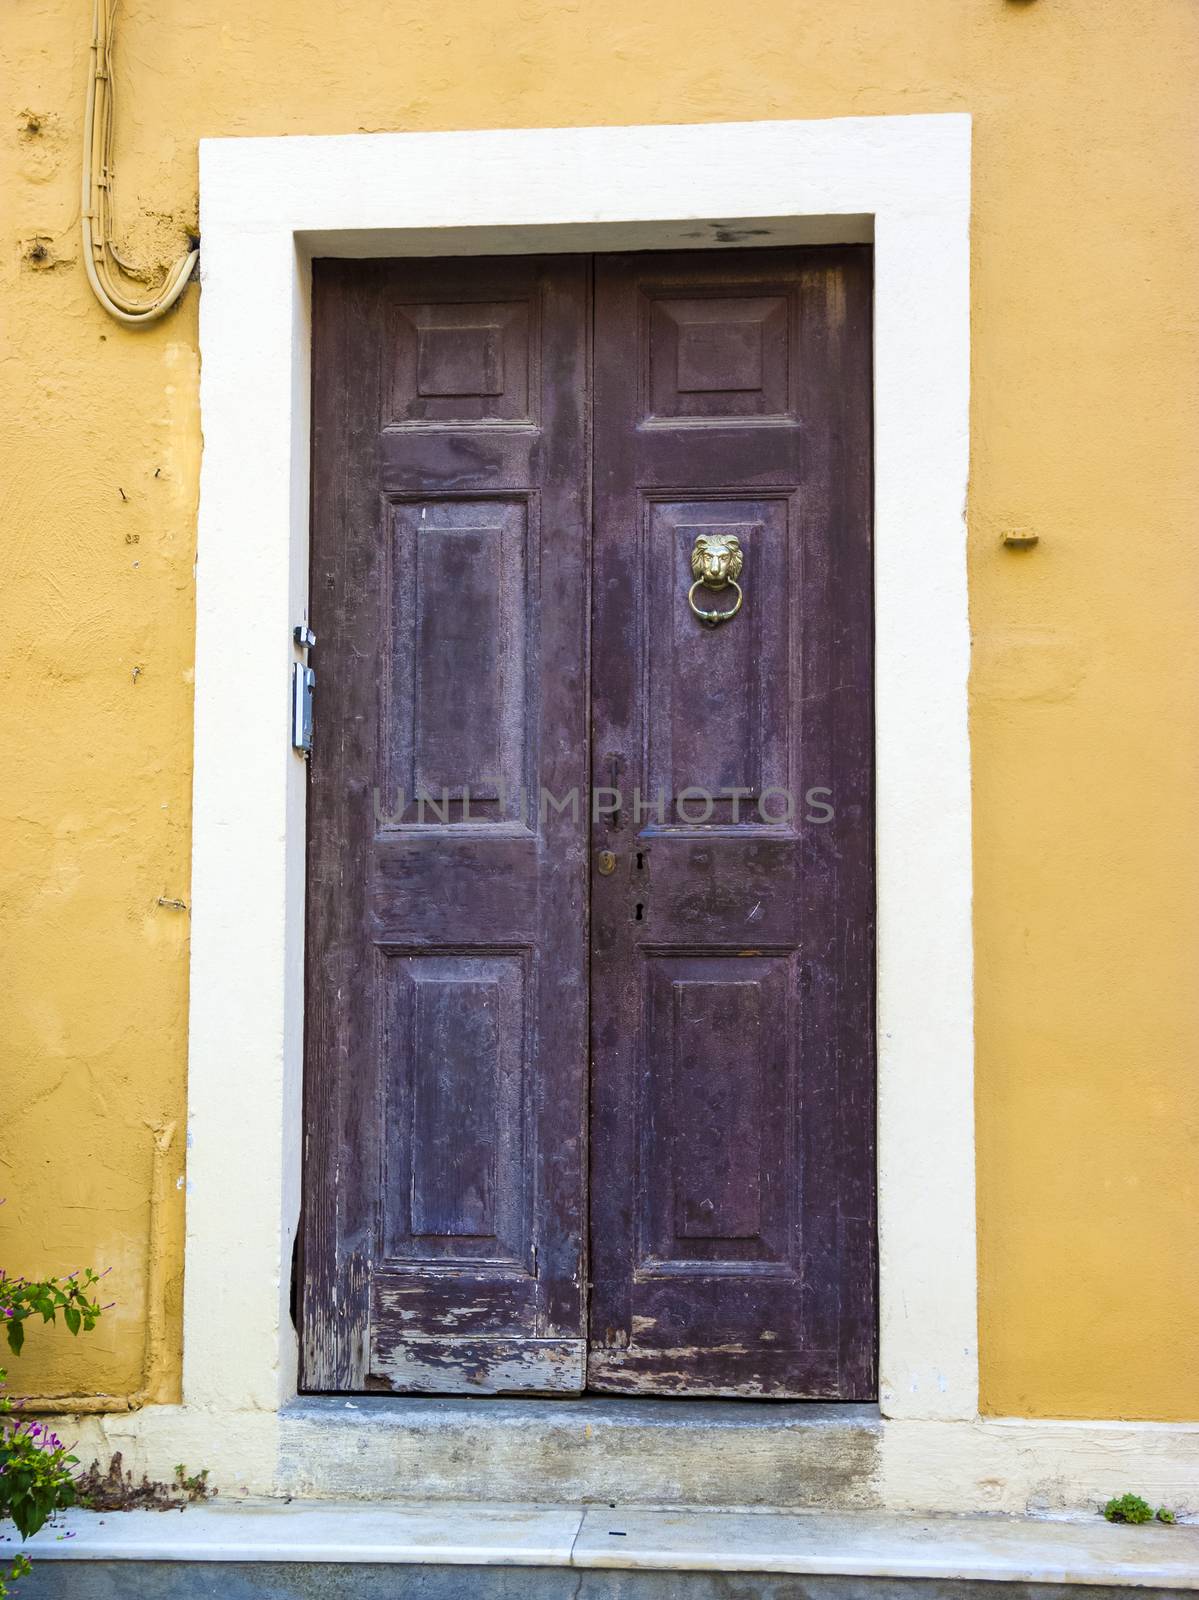 Entrance into old house in Corfu, Greece by ankarb